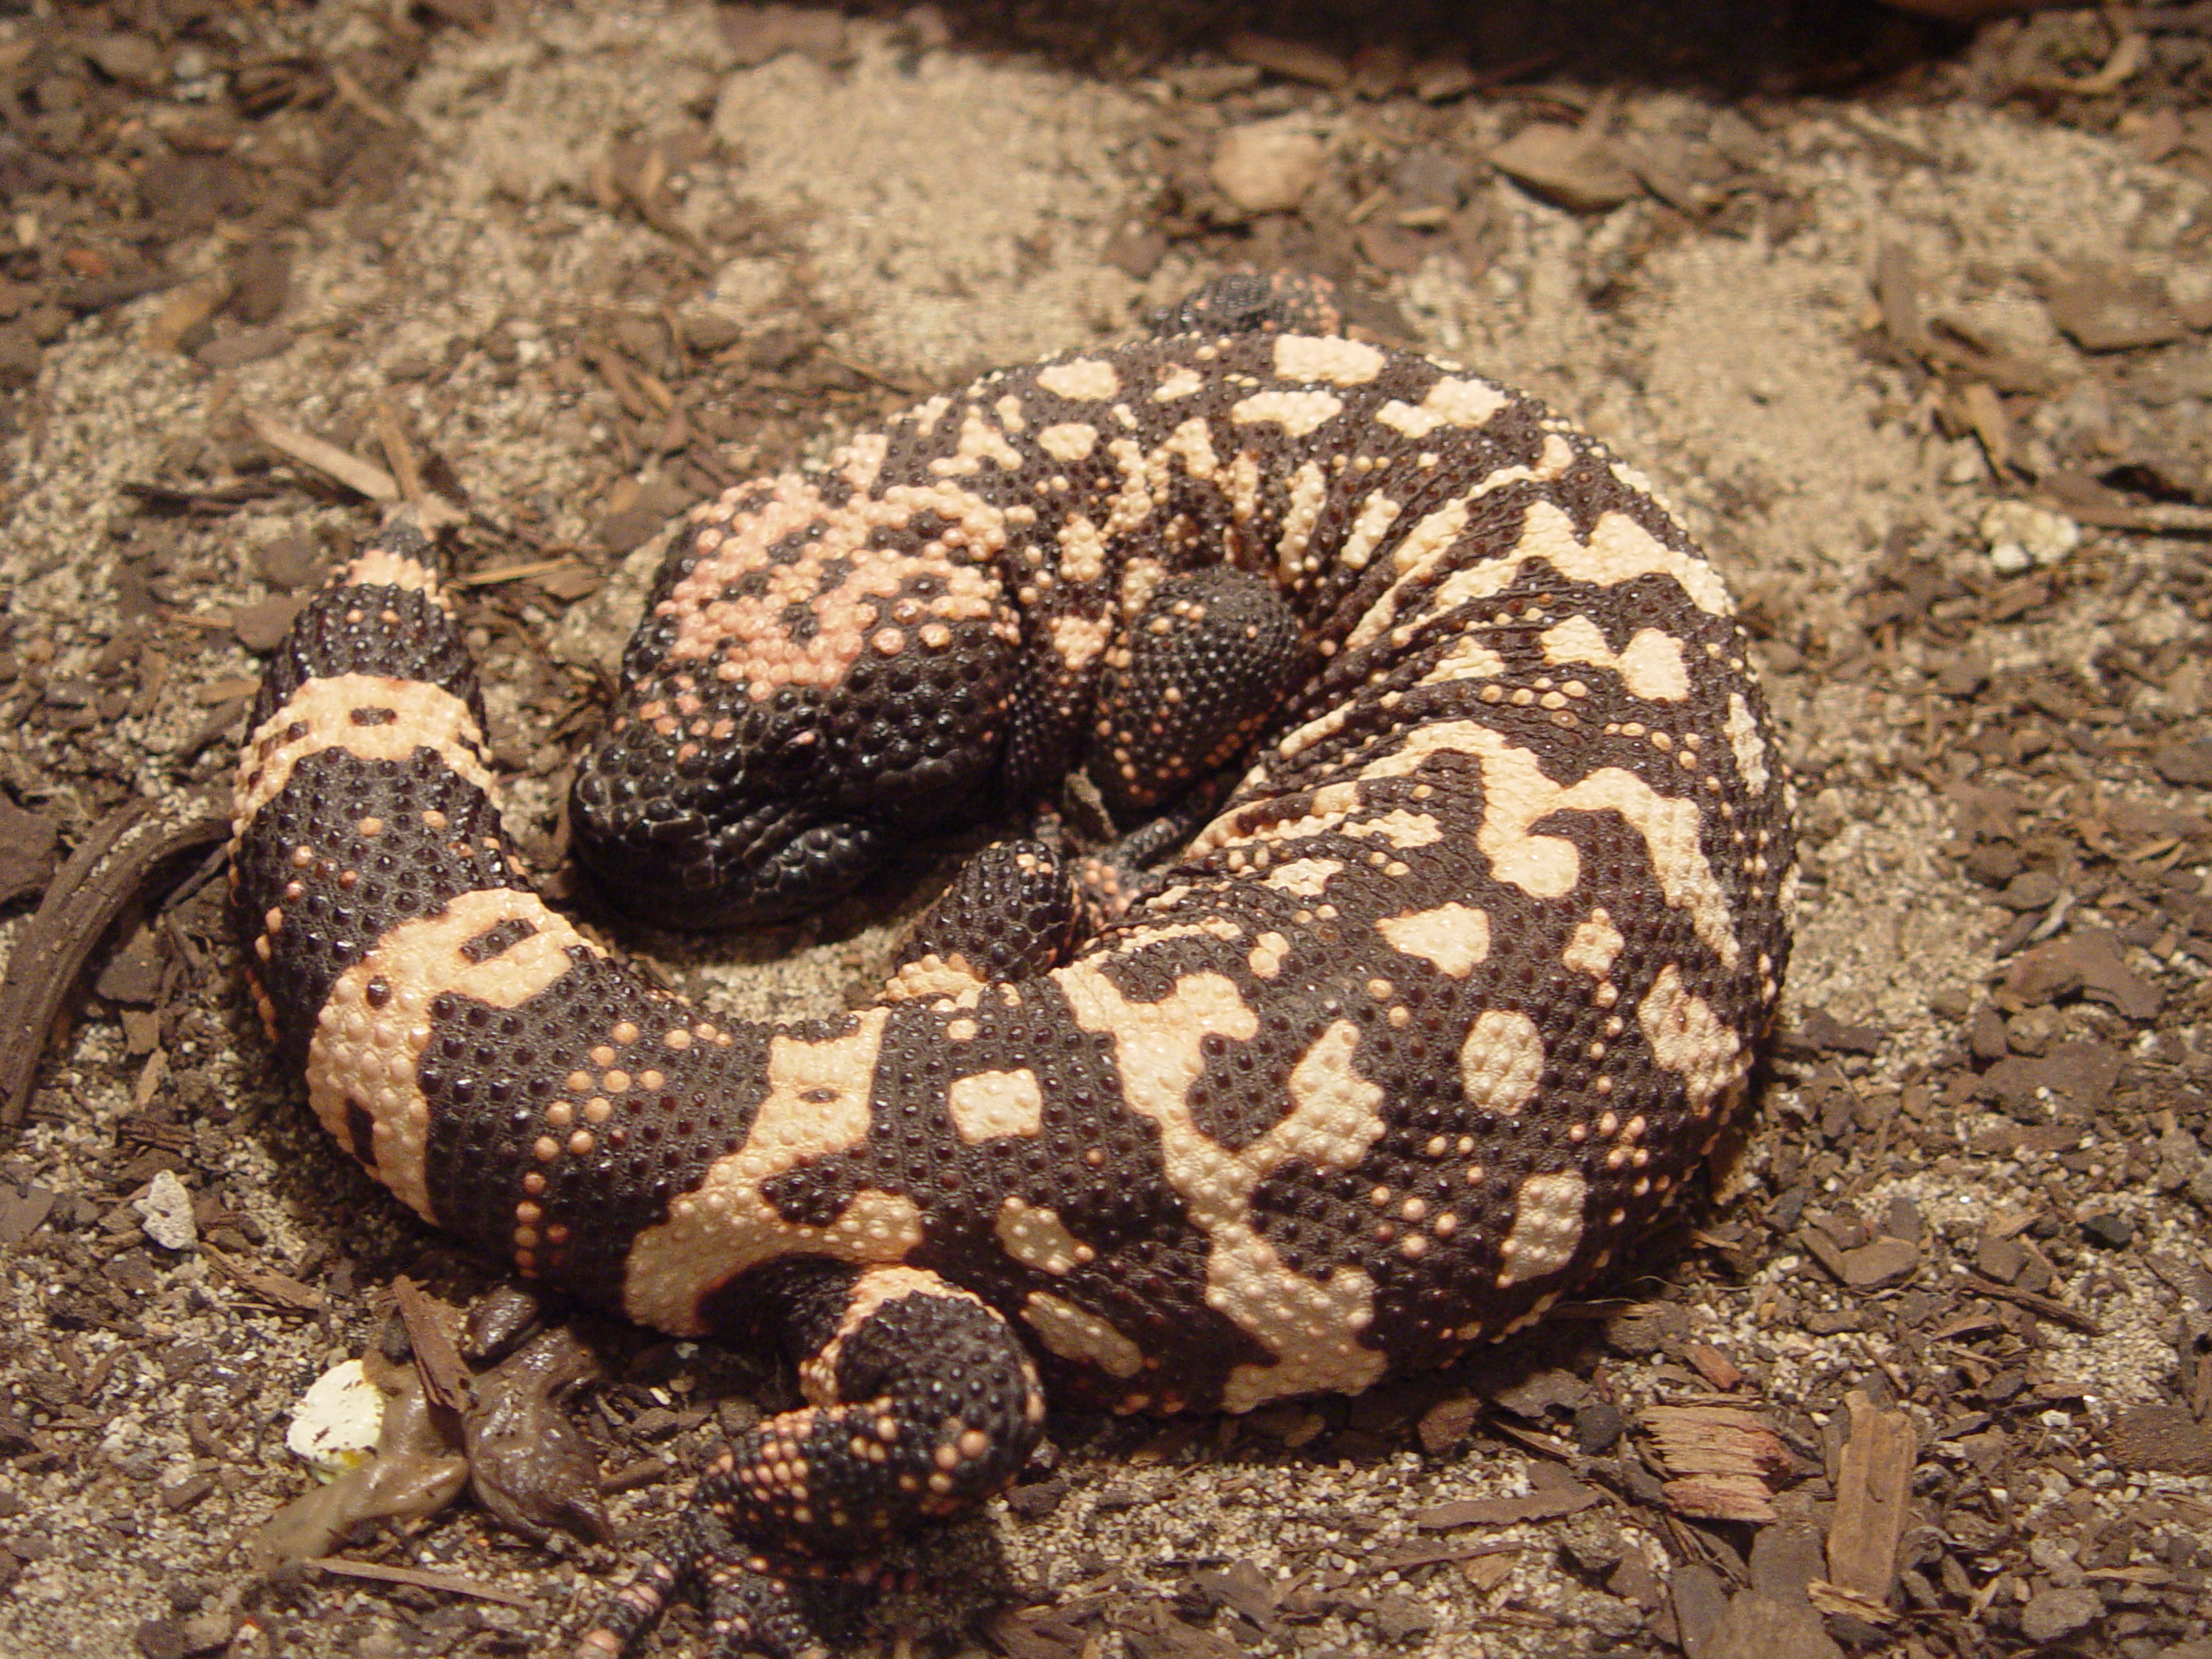 Is the Gila monster the only venomous?